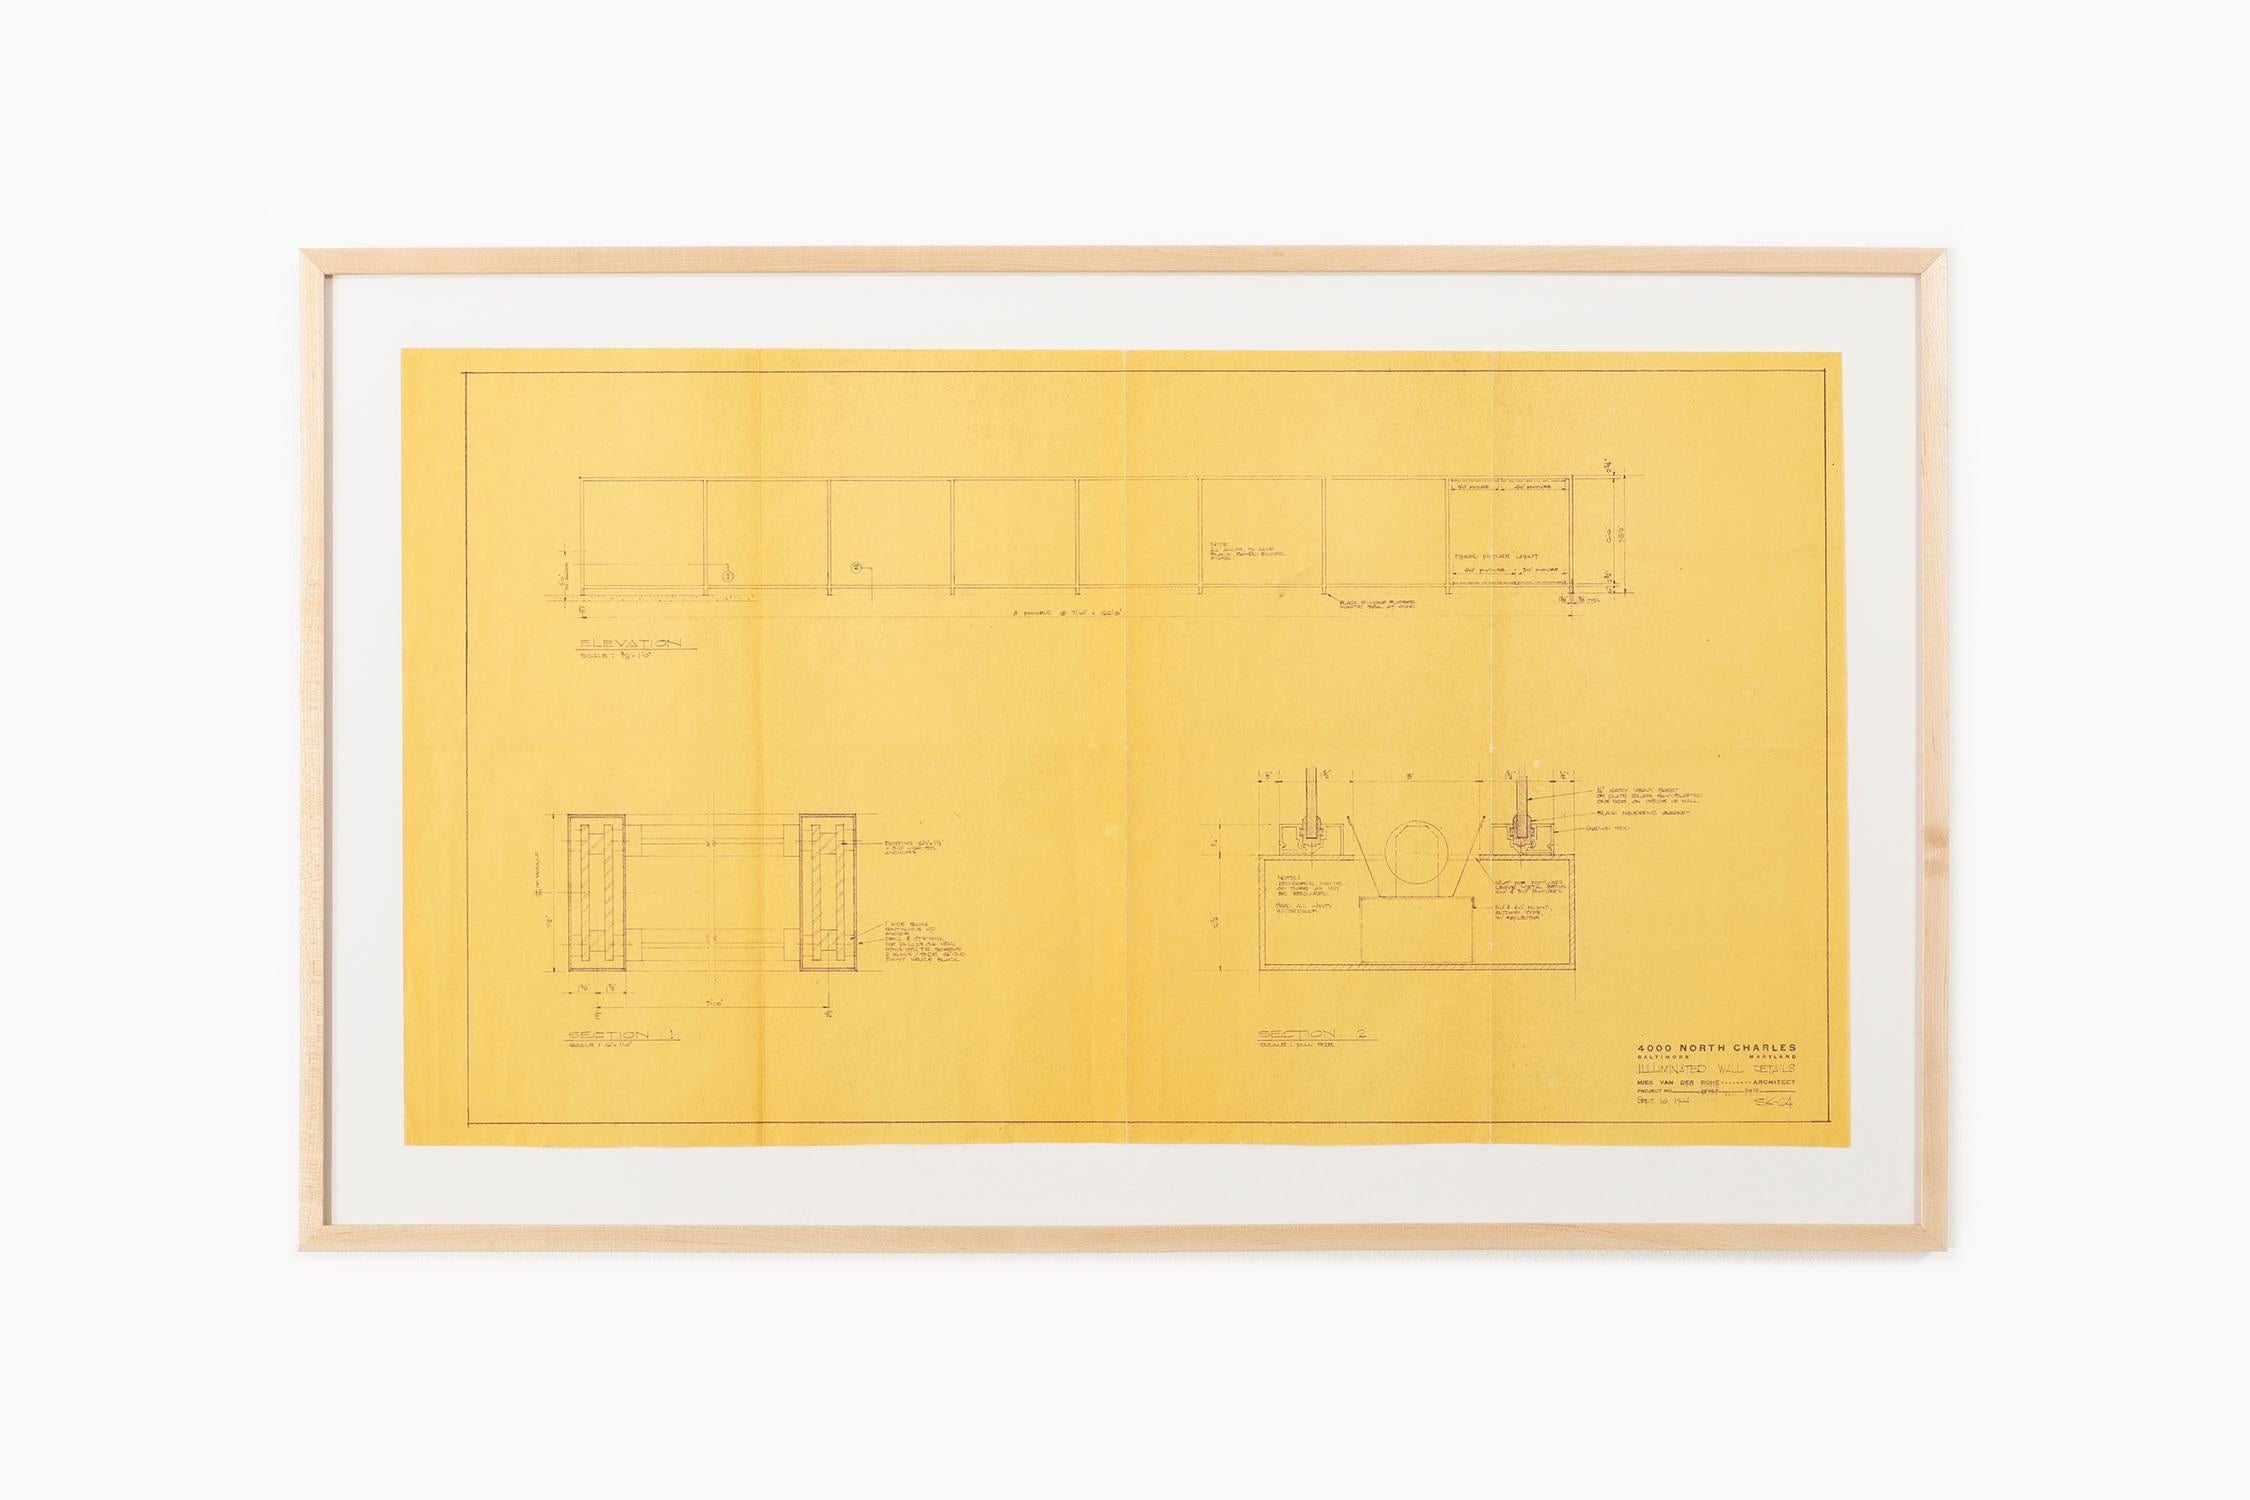 Mies van der Rohe Blueprint, 4000 N. Charles Baltimore, 1964, Lower Levels For Sale 1